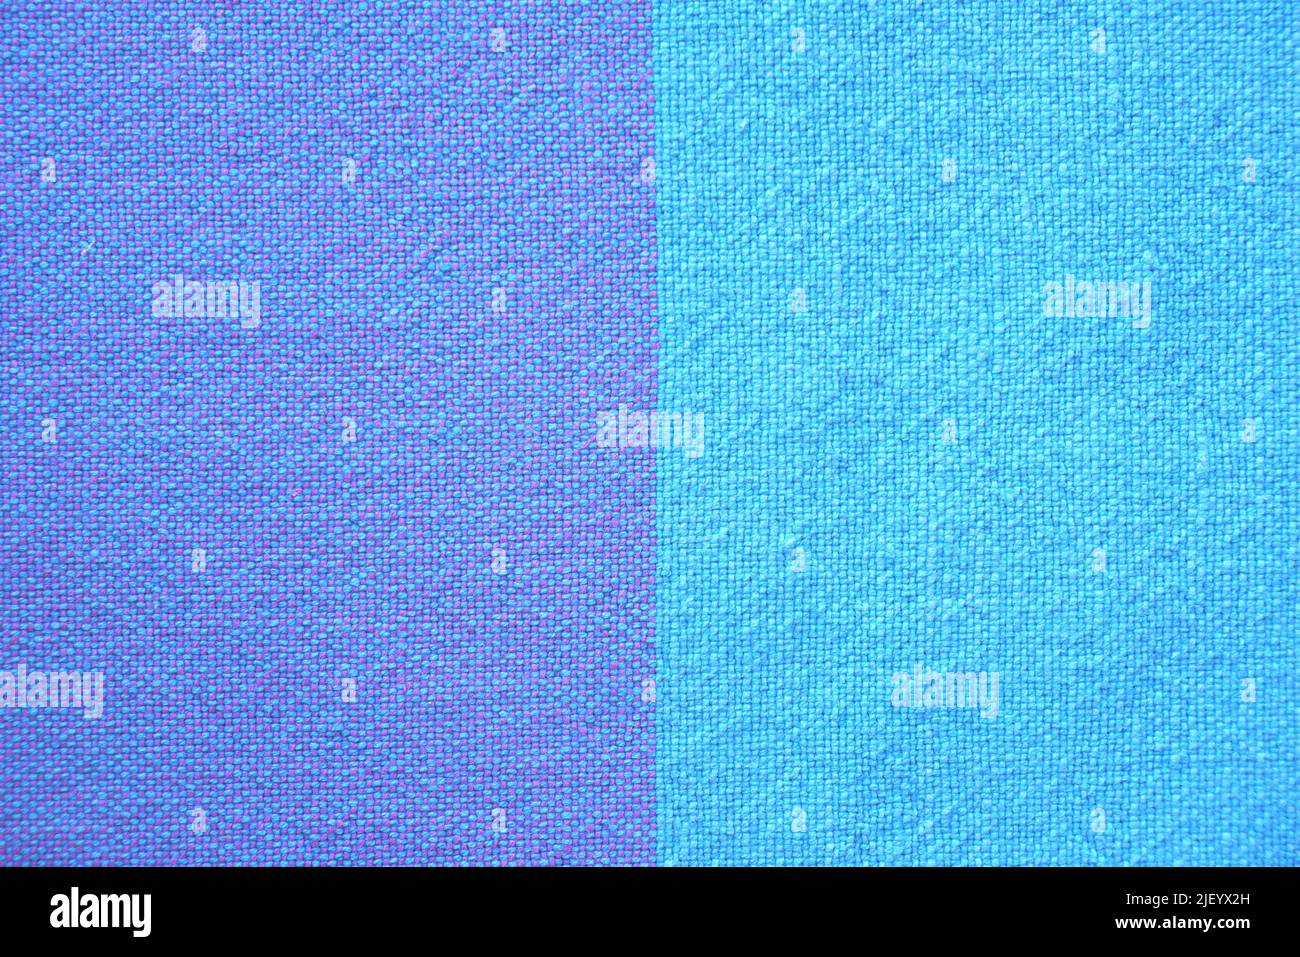 Turquoise and blue fabric textile cloth Stock Photo